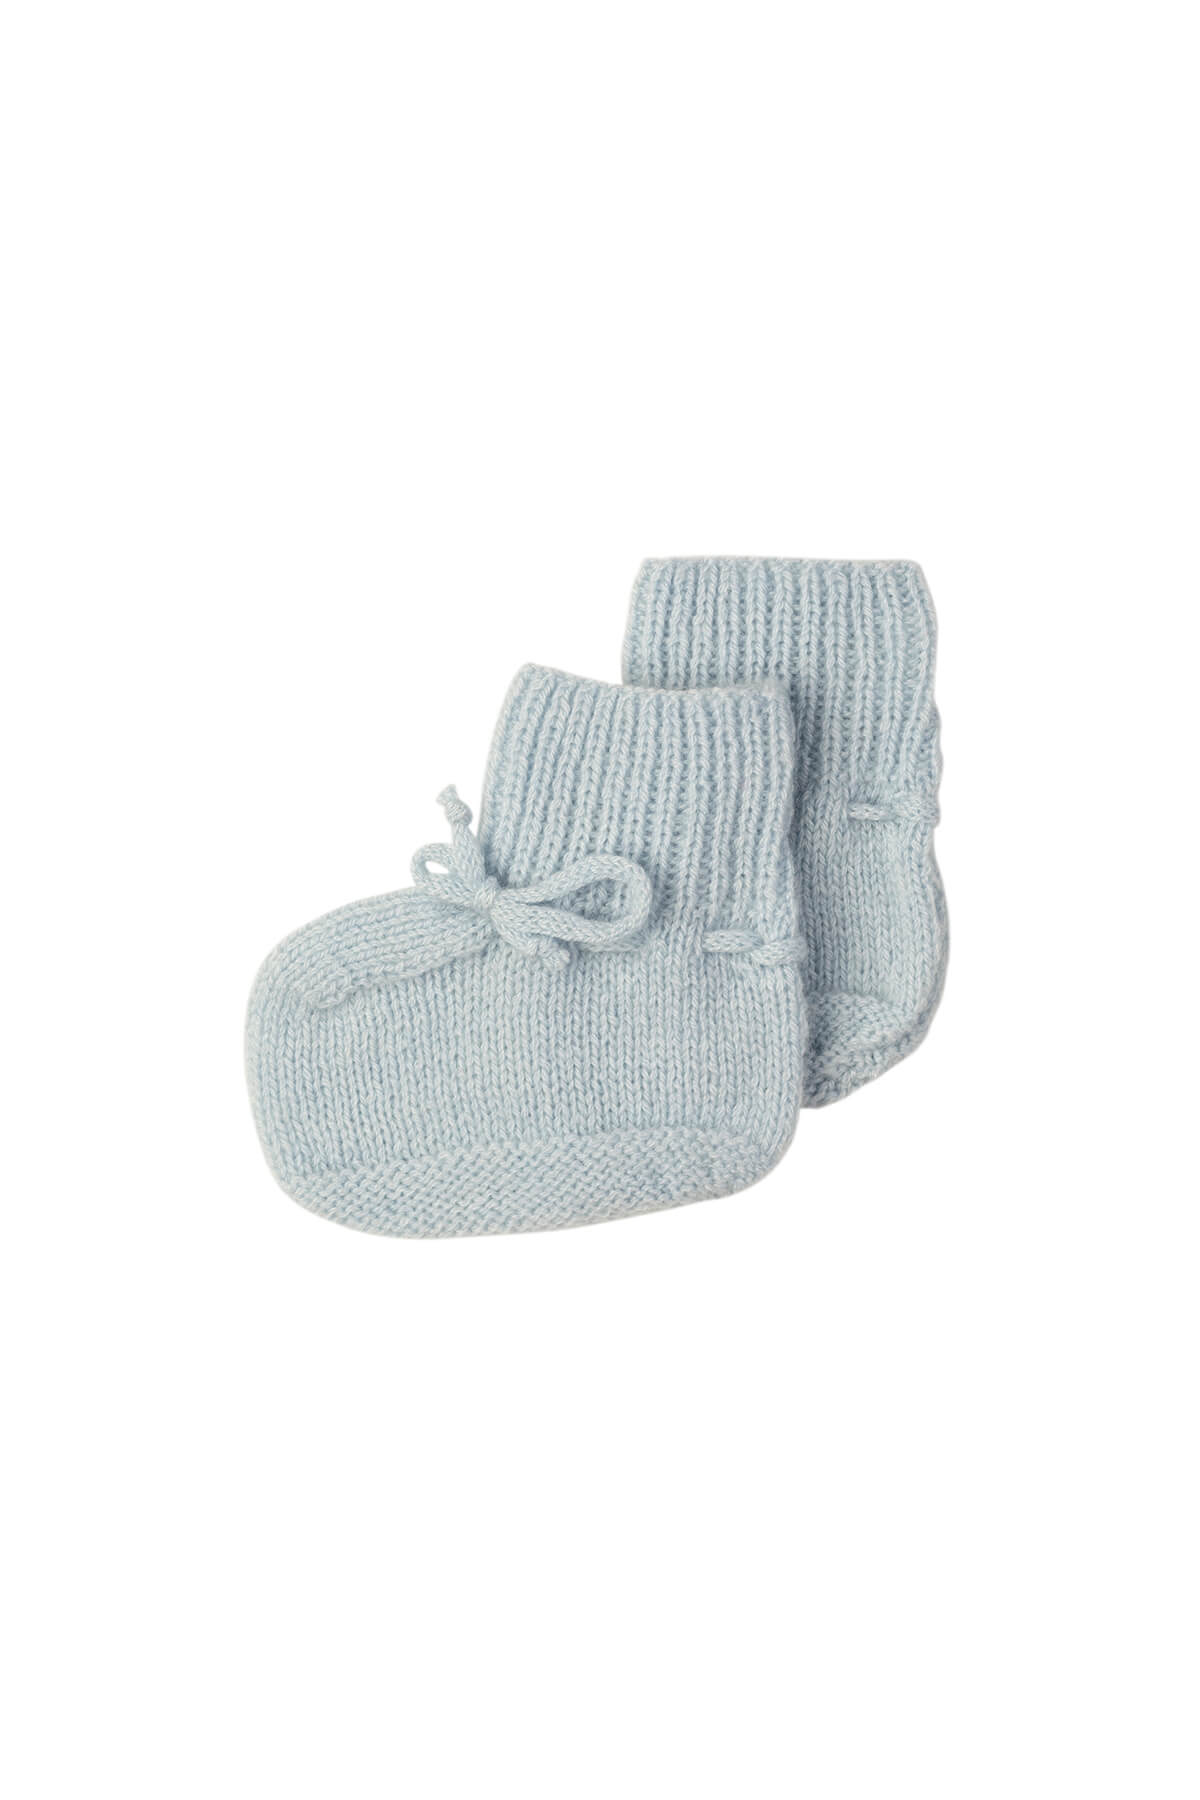 Johnstons of Elgin Hand Knitted Cashmere Baby Booties in Powder Blue on white background 617112809ONE